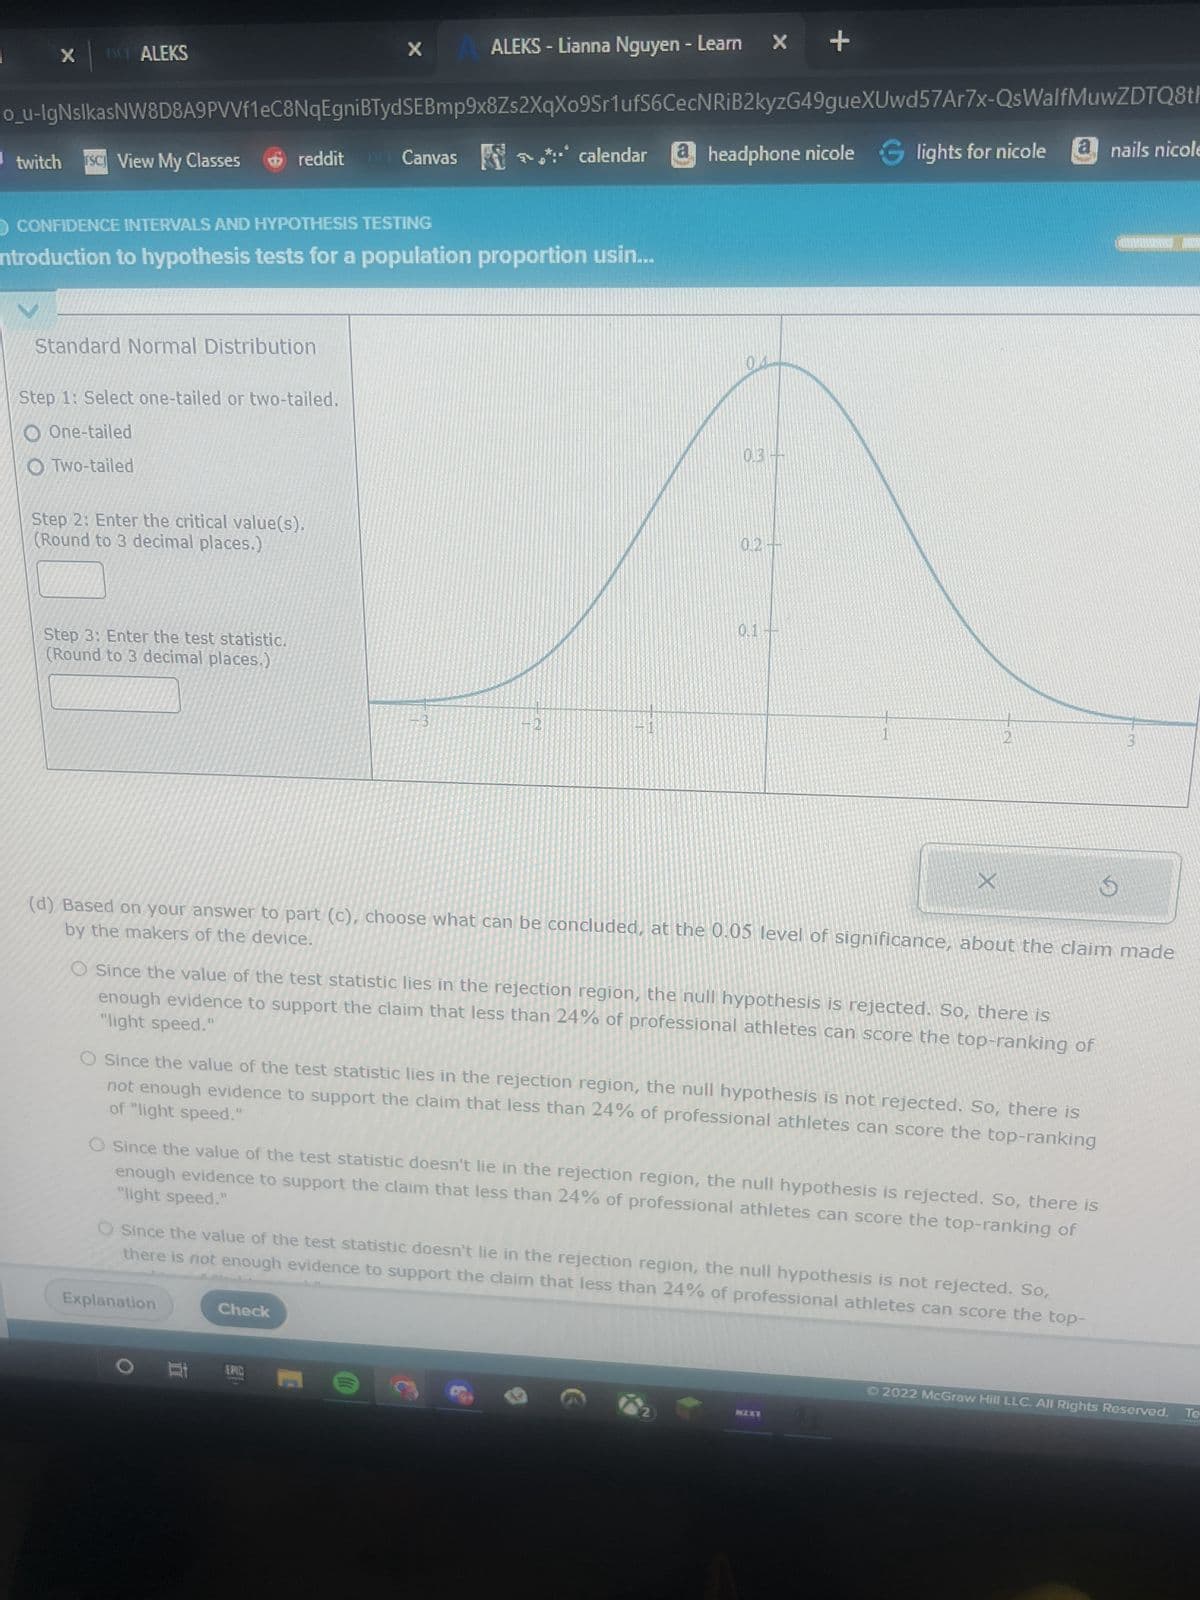 X
× | ALEKS
scgi/x/Isl.exe/1o_u-IgNsIkasNW8D8A9PVVf1eC8NqEgniBTyd
twitch SC View My Classes
ft session expired
M gmail
|||
Ho
H₁:
reddit
CONFIDENCE INTERVALS AND HYPOTHESIS TESTING
Introduction to hypothesis tests for a population proportion usin...
X
Standard Normal Distribution
Explanation
SEBmp9x8Zs2XqXo9Sr1ufS6CecNRIB2kyzG49gueXUwd57Ar7x-QsWalfMuwZDTQ8th1X_GKROKSCEJDq?10Bw7QYjlbavbSPXtx
headphone nicole lights for nicole
O
Canvas*** calendar
Check
ALEKS - Lianna Nguyen - Learn X +
Photon is a training device that is designed to improve a user's reaction time. Similar devices have been criticized for being too easy to master, but the makers
of Photon say that their device is built to give most users room to improve. The makers say that even among professional athletes, the proportion, p, who can
score the top ranking of "light speed" is less than 24%. A random sample of 115 professional athletes is chosen, and 16 score a ranking of "light speed" while
using the device.
Complete the parts below to perform a hypothesis test to see if there is enough evidence, at the 0.05 level of significance, to support the claim that the
proportion of all professional athletes who can score a ranking of "light speed" is less than 24%.
(a) State the null hypothesis Ho and the alternative hypothesis H₁ that you would use for the test.
13
EPIC
VE
VE
• The value of the test statistic is given by z
=
X
(c) Perform a Z-test. Here is some information to help you with your Z-test.
• 70.05 is the value that cuts off an area of 0.05 in the right tail of the distribution.
р-р
p(1-P)
n
p
USO
(b) For your hypothesis test, you will use a Z-test. Find the values of np and n (1-p) to confirm that a Z-test can be used. (One standard is that np > 10
and n (1-p) ≥ 10 under the assumption that the null hypothesis is true.) Here è is the sample size and p is the population proportion you are testing.
np = 0
n(1-p) =
EVE
a nails nicole
a nicole balm
nicole realy want
NZXY
0/5
(
Ⓒ2022 McGraw Hill LLC. All Rights Reserved. Terms of Use | Privacy Center | Acces